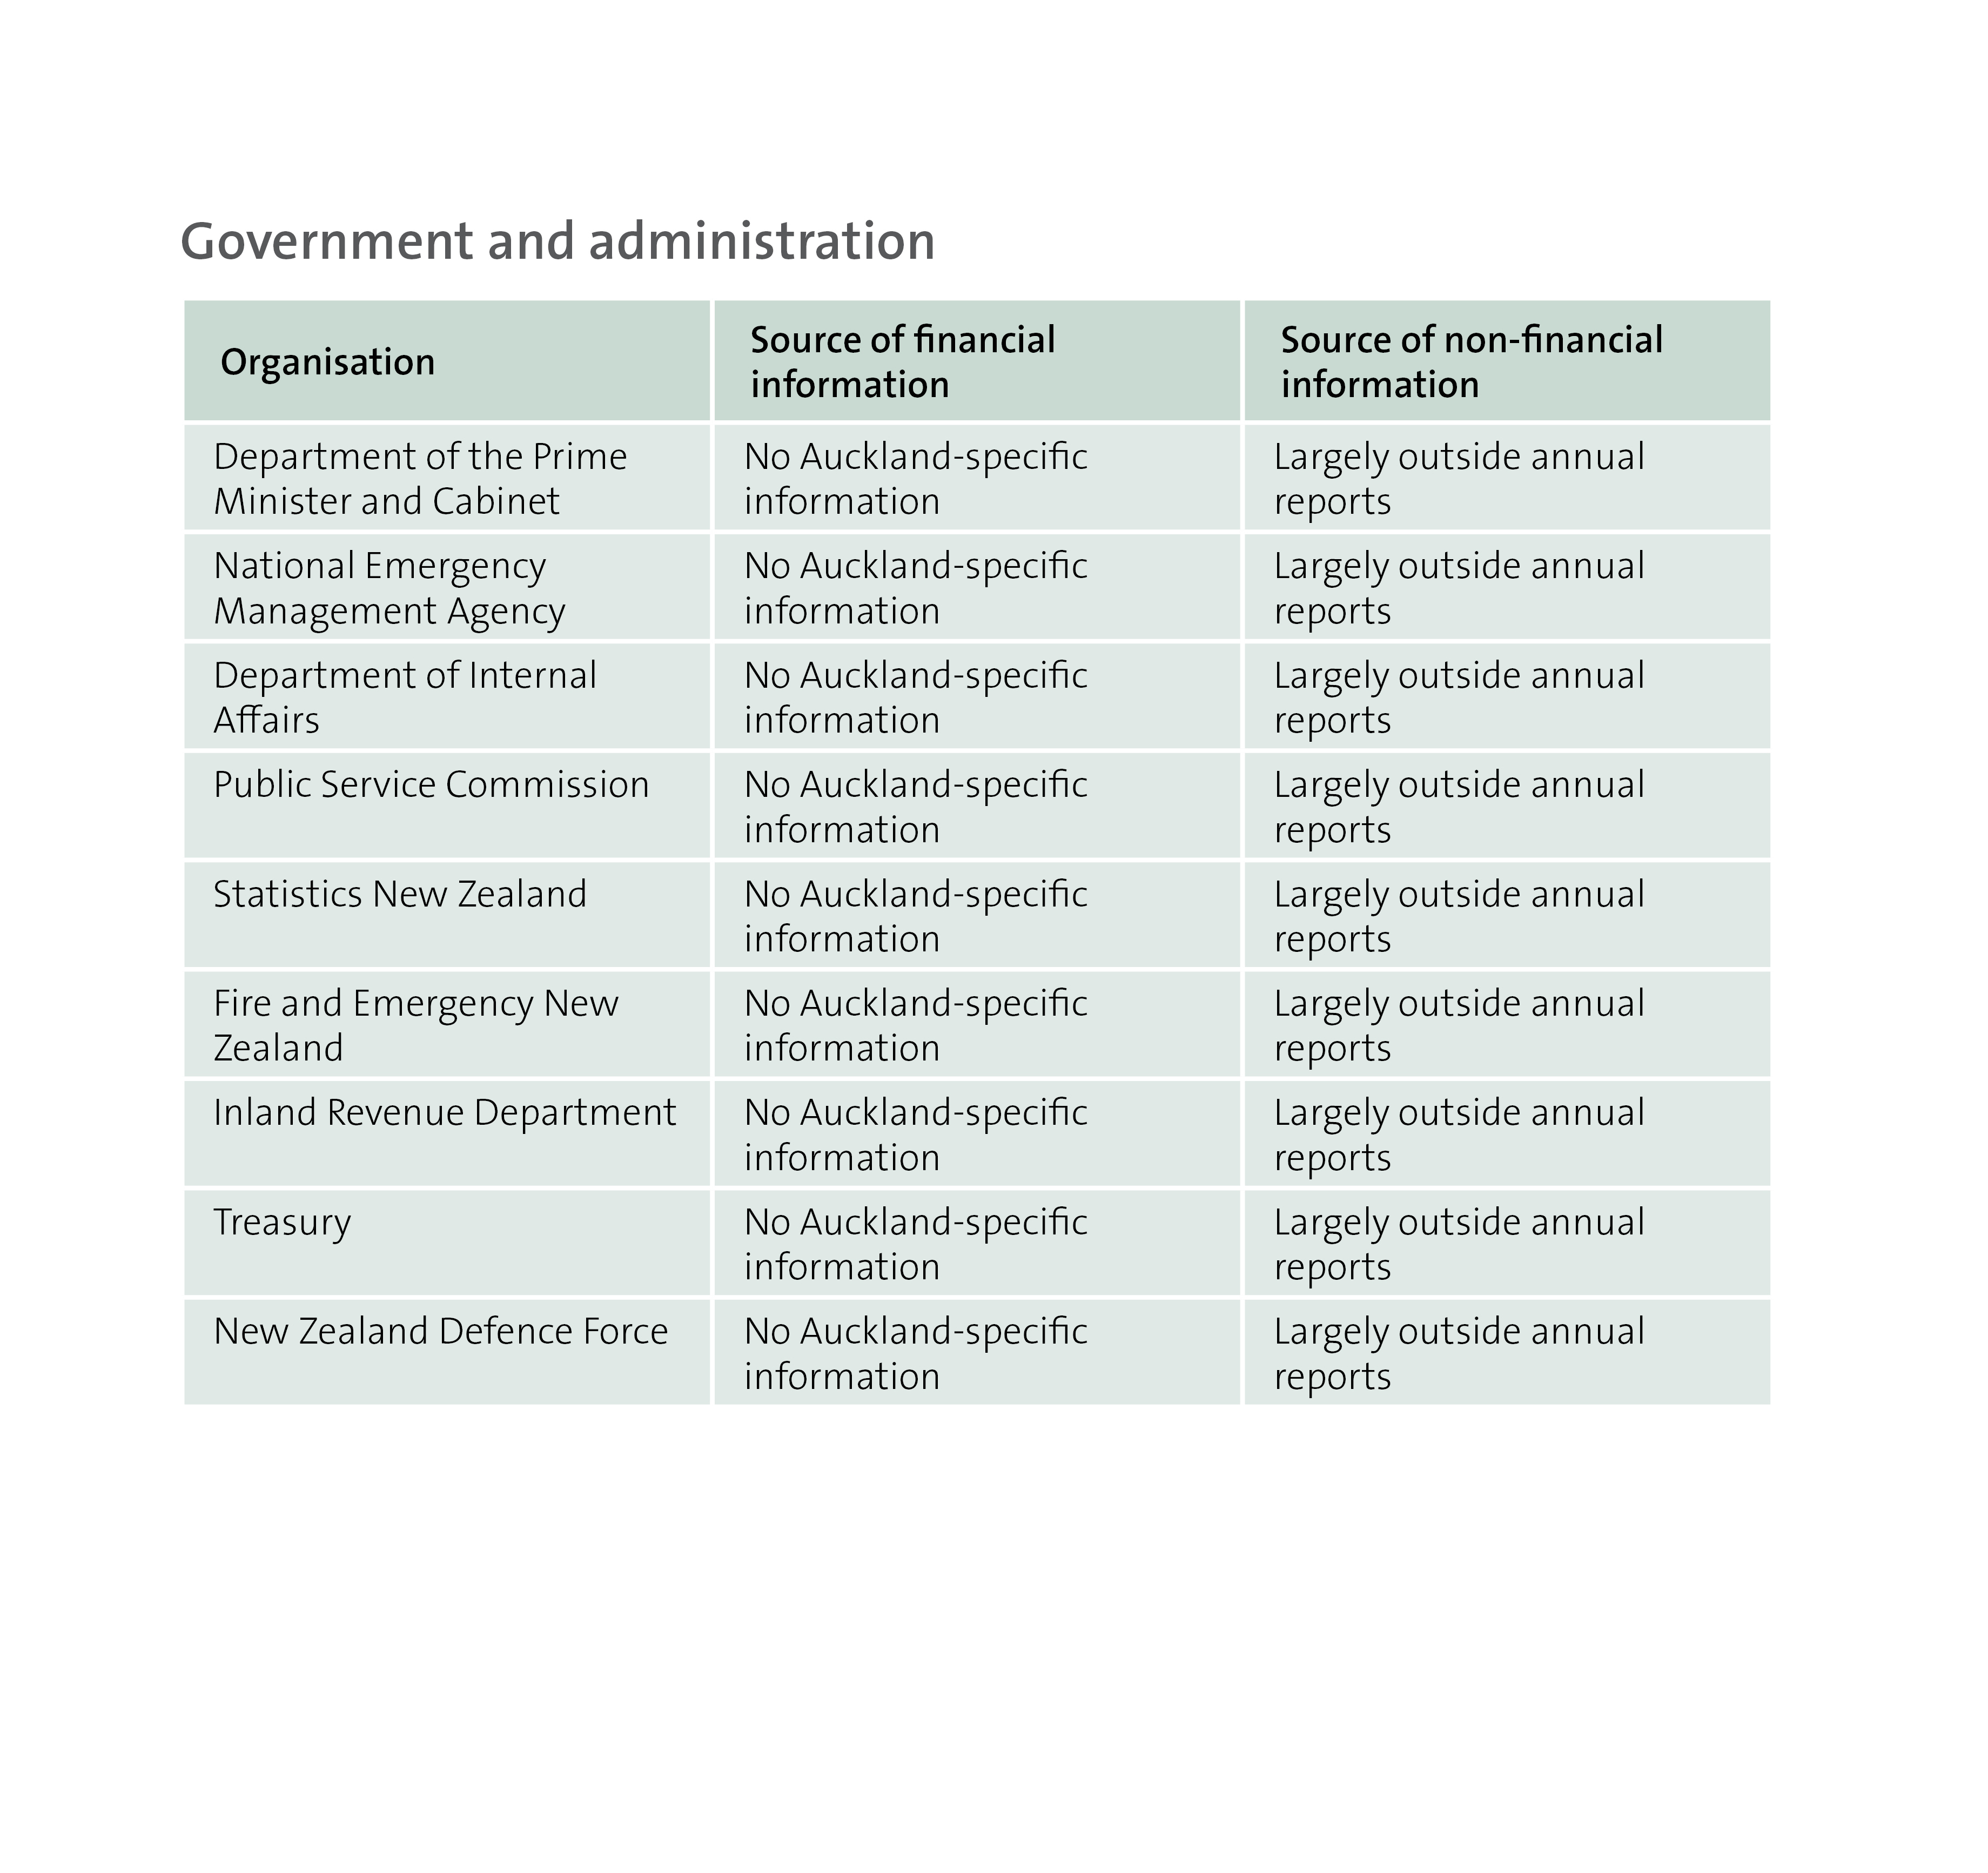 The public organisations we looked at - government and administration